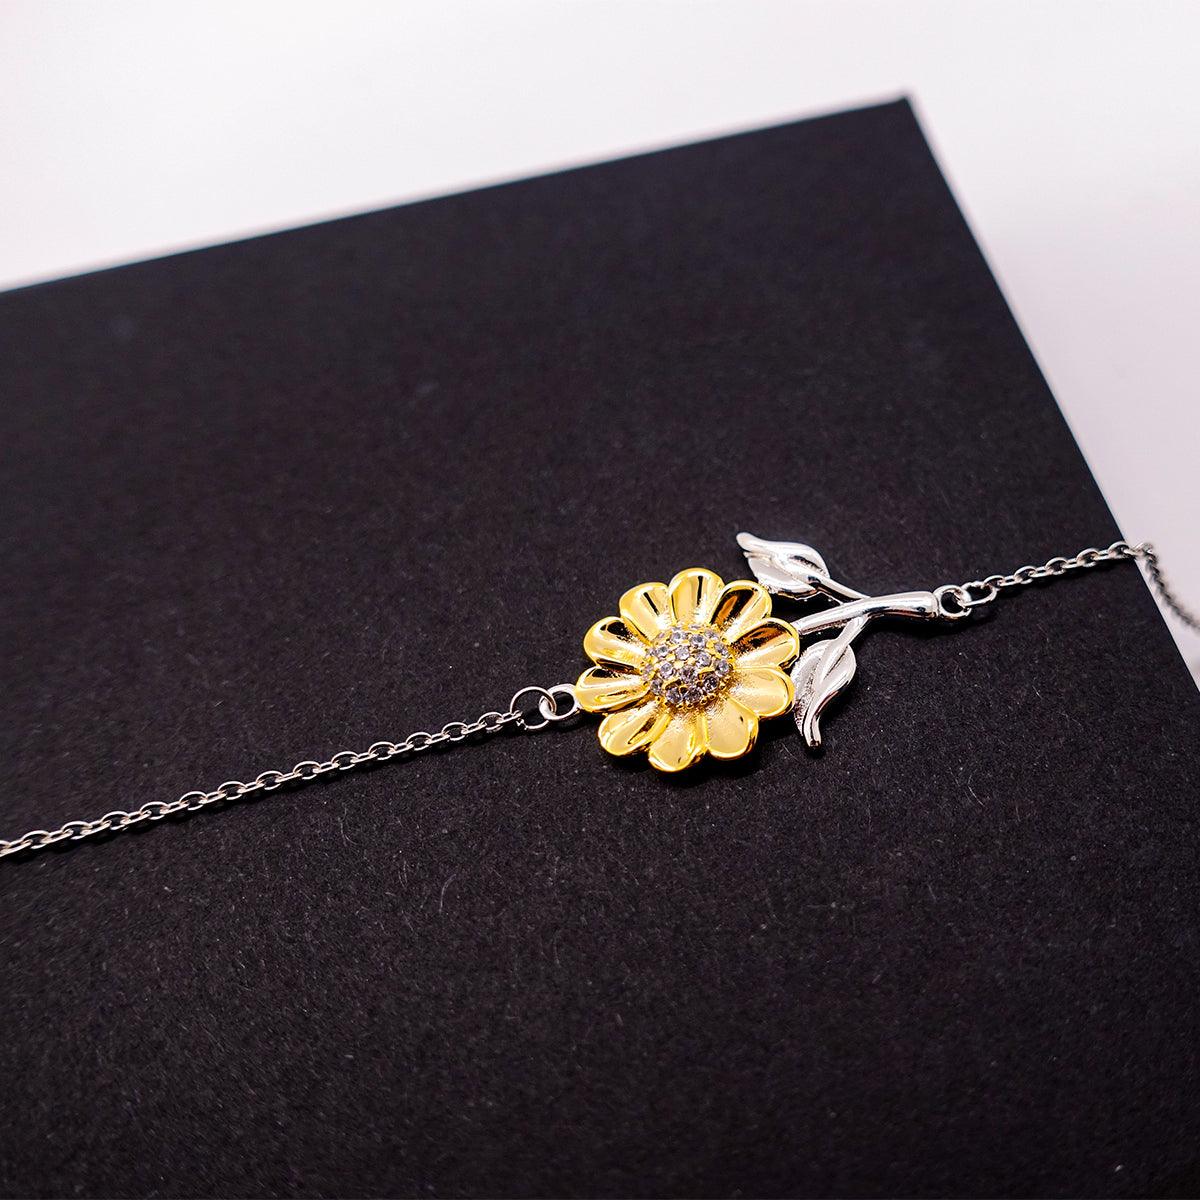 Wife Sunflower Bracelet Gifts, To My Wife You are braver than you believe, stronger than you seem, Inspirational Gifts For Wife Card, Birthday, Christmas Gifts For Wife Men Women - Mallard Moon Gift Shop